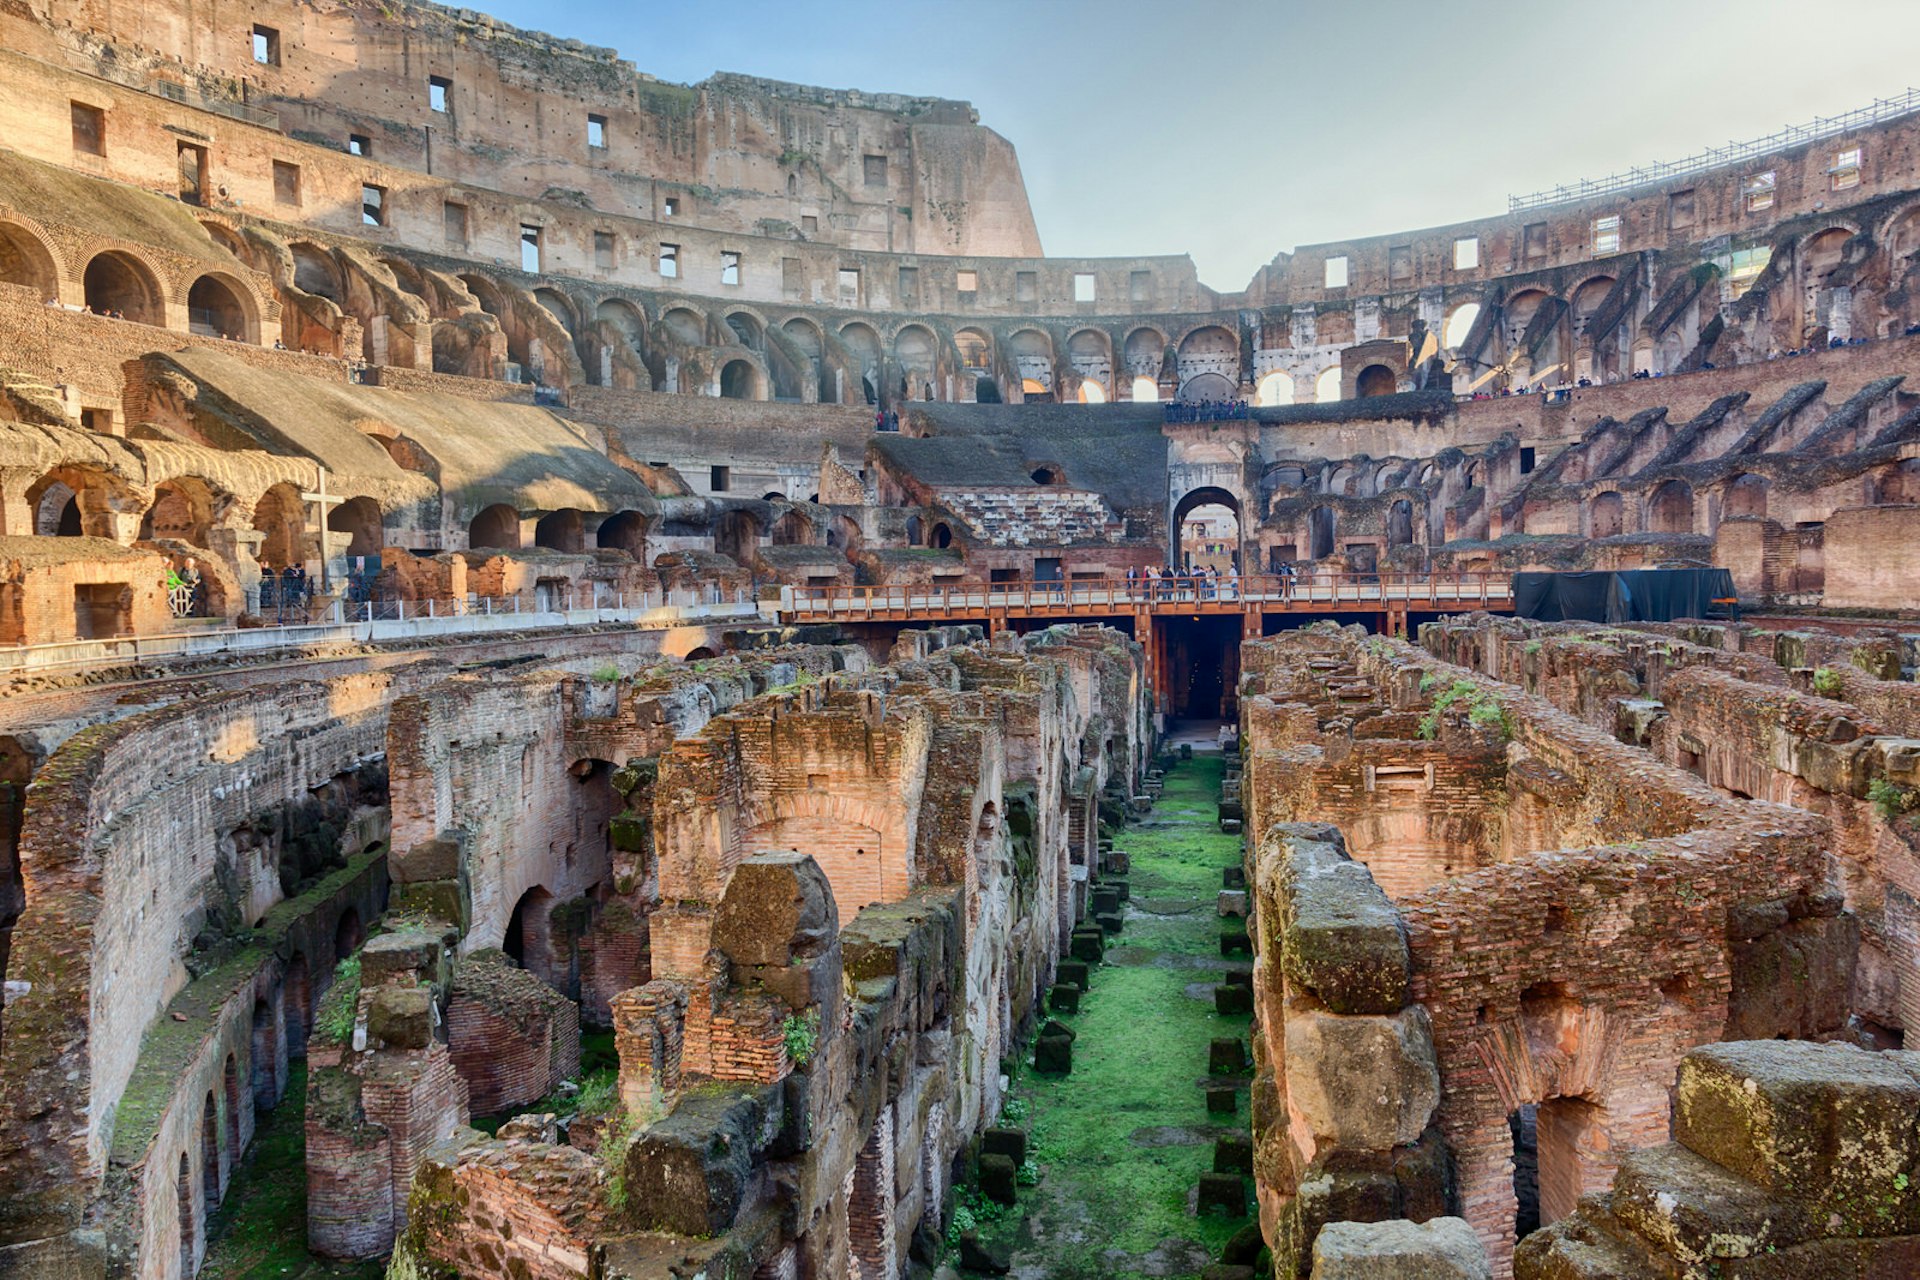 The Colosseum, Rome © Steve Whiston / Fallen Log Photography / Getty Images